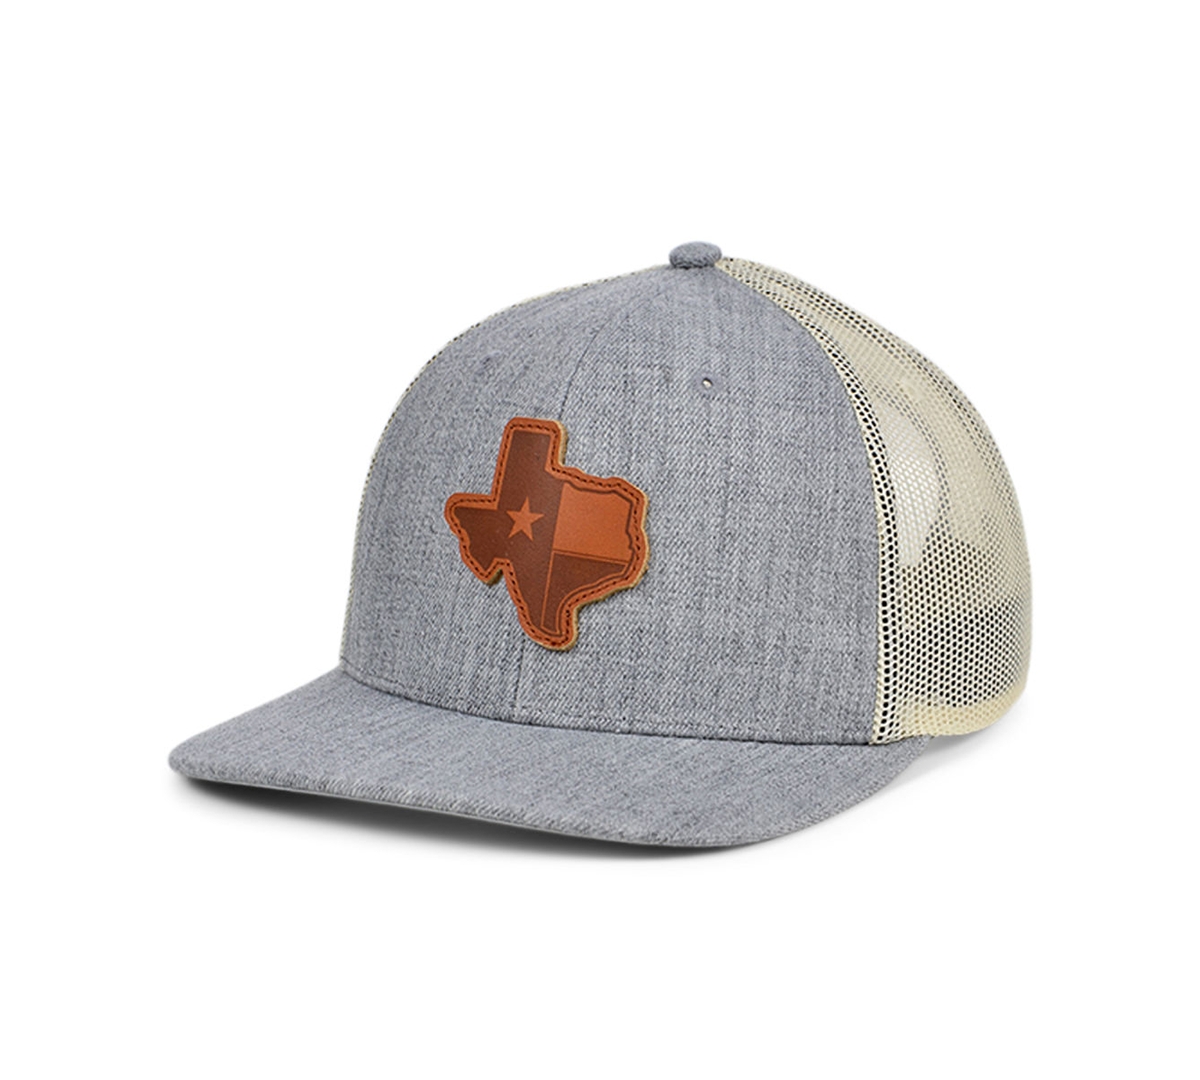 Lids Local Crowns Texas Heather Leather State Patch Curved Trucker Cap In Heather Gray,white,brown